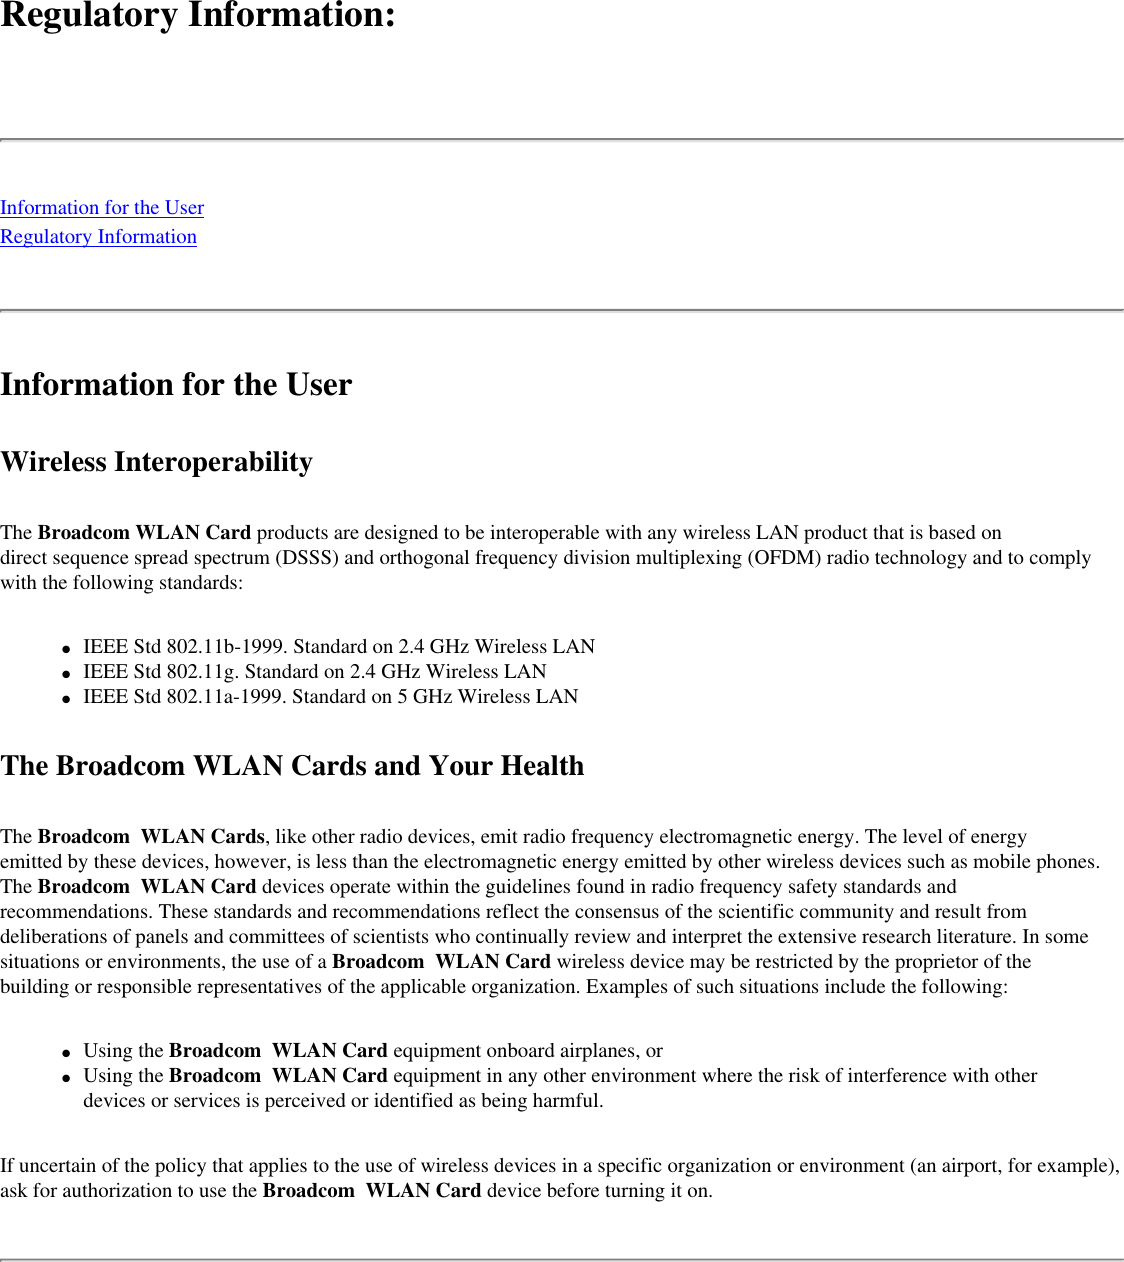 Regulatory Information: Information for the UserRegulatory InformationInformation for the UserWireless InteroperabilityThe Broadcom WLAN Card products are designed to be interoperable with any wireless LAN product that is based on direct sequence spread spectrum (DSSS) and orthogonal frequency division multiplexing (OFDM) radio technology and to comply with the following standards:●     IEEE Std 802.11b-1999. Standard on 2.4 GHz Wireless LAN●     IEEE Std 802.11g. Standard on 2.4 GHz Wireless LAN●     IEEE Std 802.11a-1999. Standard on 5 GHz Wireless LANThe Broadcom WLAN Cards and Your HealthThe Broadcom  WLAN Cards, like other radio devices, emit radio frequency electromagnetic energy. The level of energy emitted by these devices, however, is less than the electromagnetic energy emitted by other wireless devices such as mobile phones. The Broadcom  WLAN Card devices operate within the guidelines found in radio frequency safety standards and recommendations. These standards and recommendations reflect the consensus of the scientific community and result from deliberations of panels and committees of scientists who continually review and interpret the extensive research literature. In some situations or environments, the use of a Broadcom  WLAN Card wireless device may be restricted by the proprietor of the building or responsible representatives of the applicable organization. Examples of such situations include the following:●     Using the Broadcom  WLAN Card equipment onboard airplanes, or●     Using the Broadcom  WLAN Card equipment in any other environment where the risk of interference with other devices or services is perceived or identified as being harmful.If uncertain of the policy that applies to the use of wireless devices in a specific organization or environment (an airport, for example), ask for authorization to use the Broadcom  WLAN Card device before turning it on.